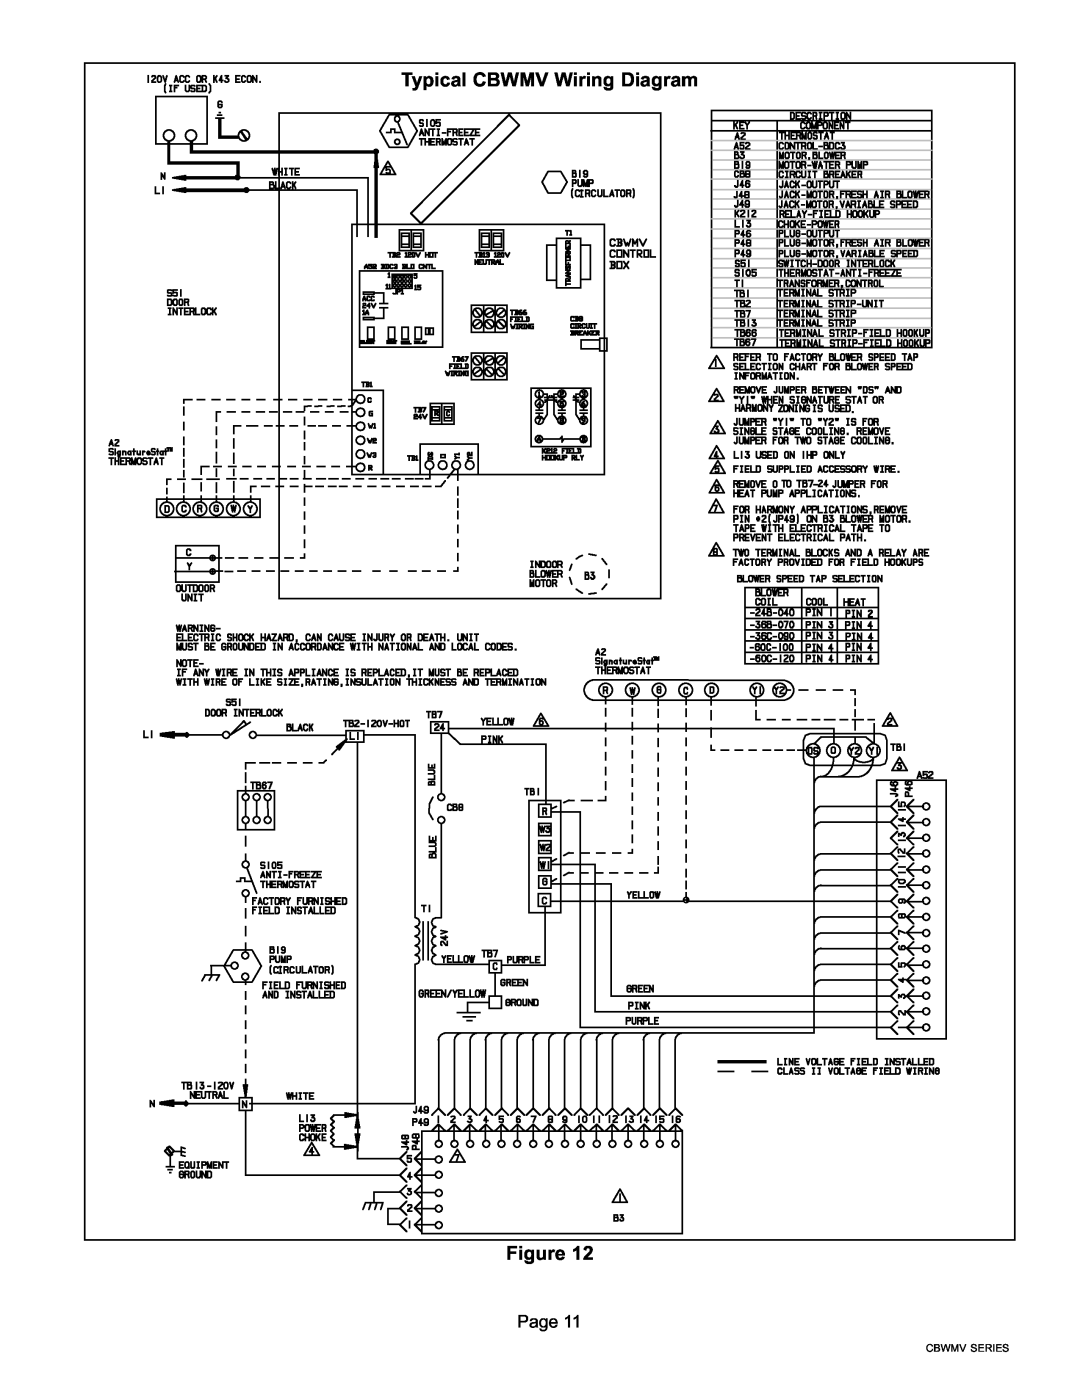 Lennox International Inc AIR HANDLERS installation instructions Typical CBWMV Wiring, Page 